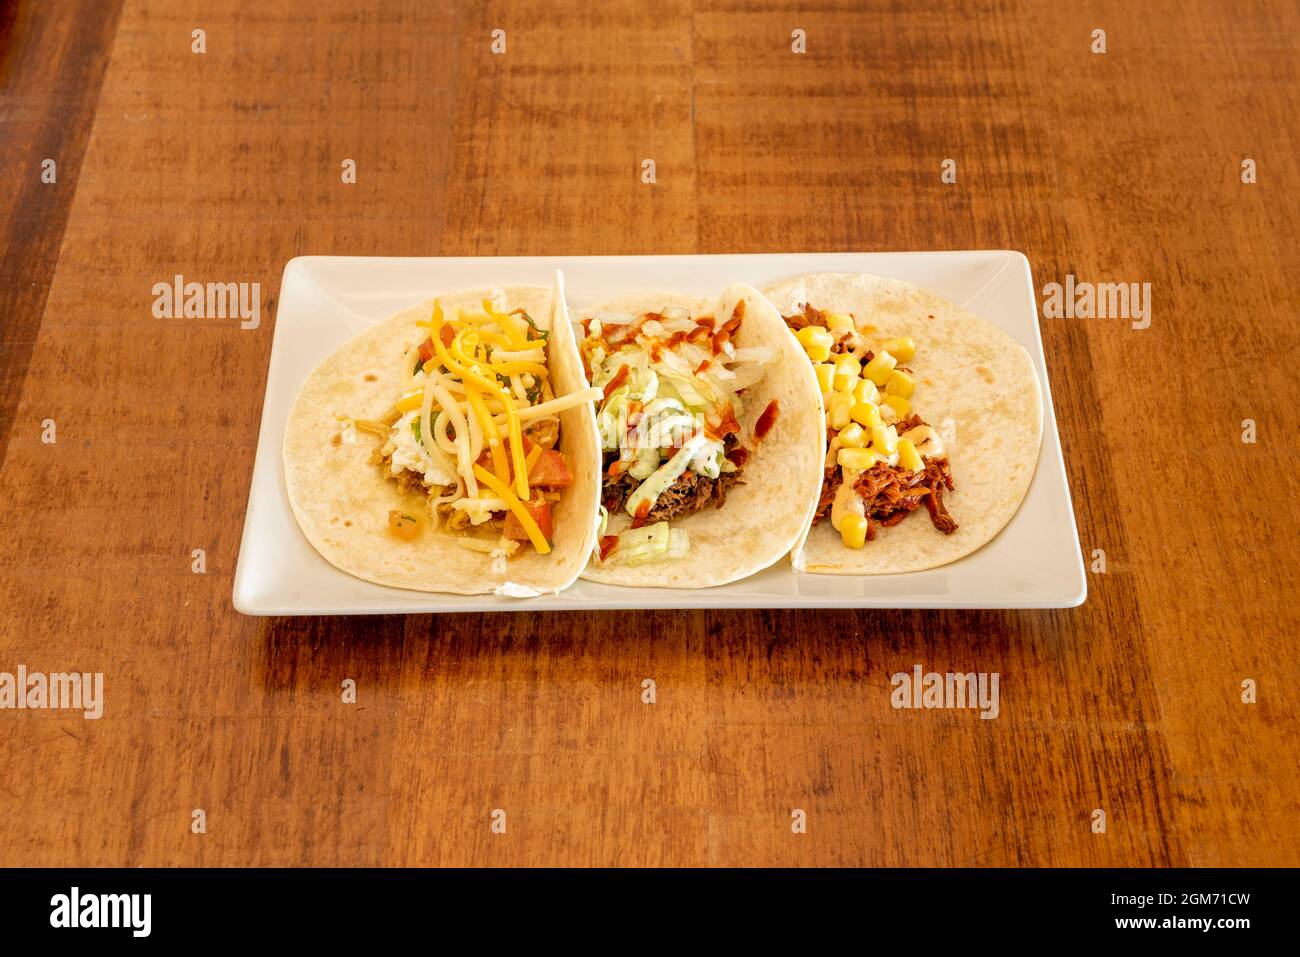 Wheat flour tortilla tacos with assorted fillings, grated cheese, pulled meat, sweet corn on wooden table Stock Photo